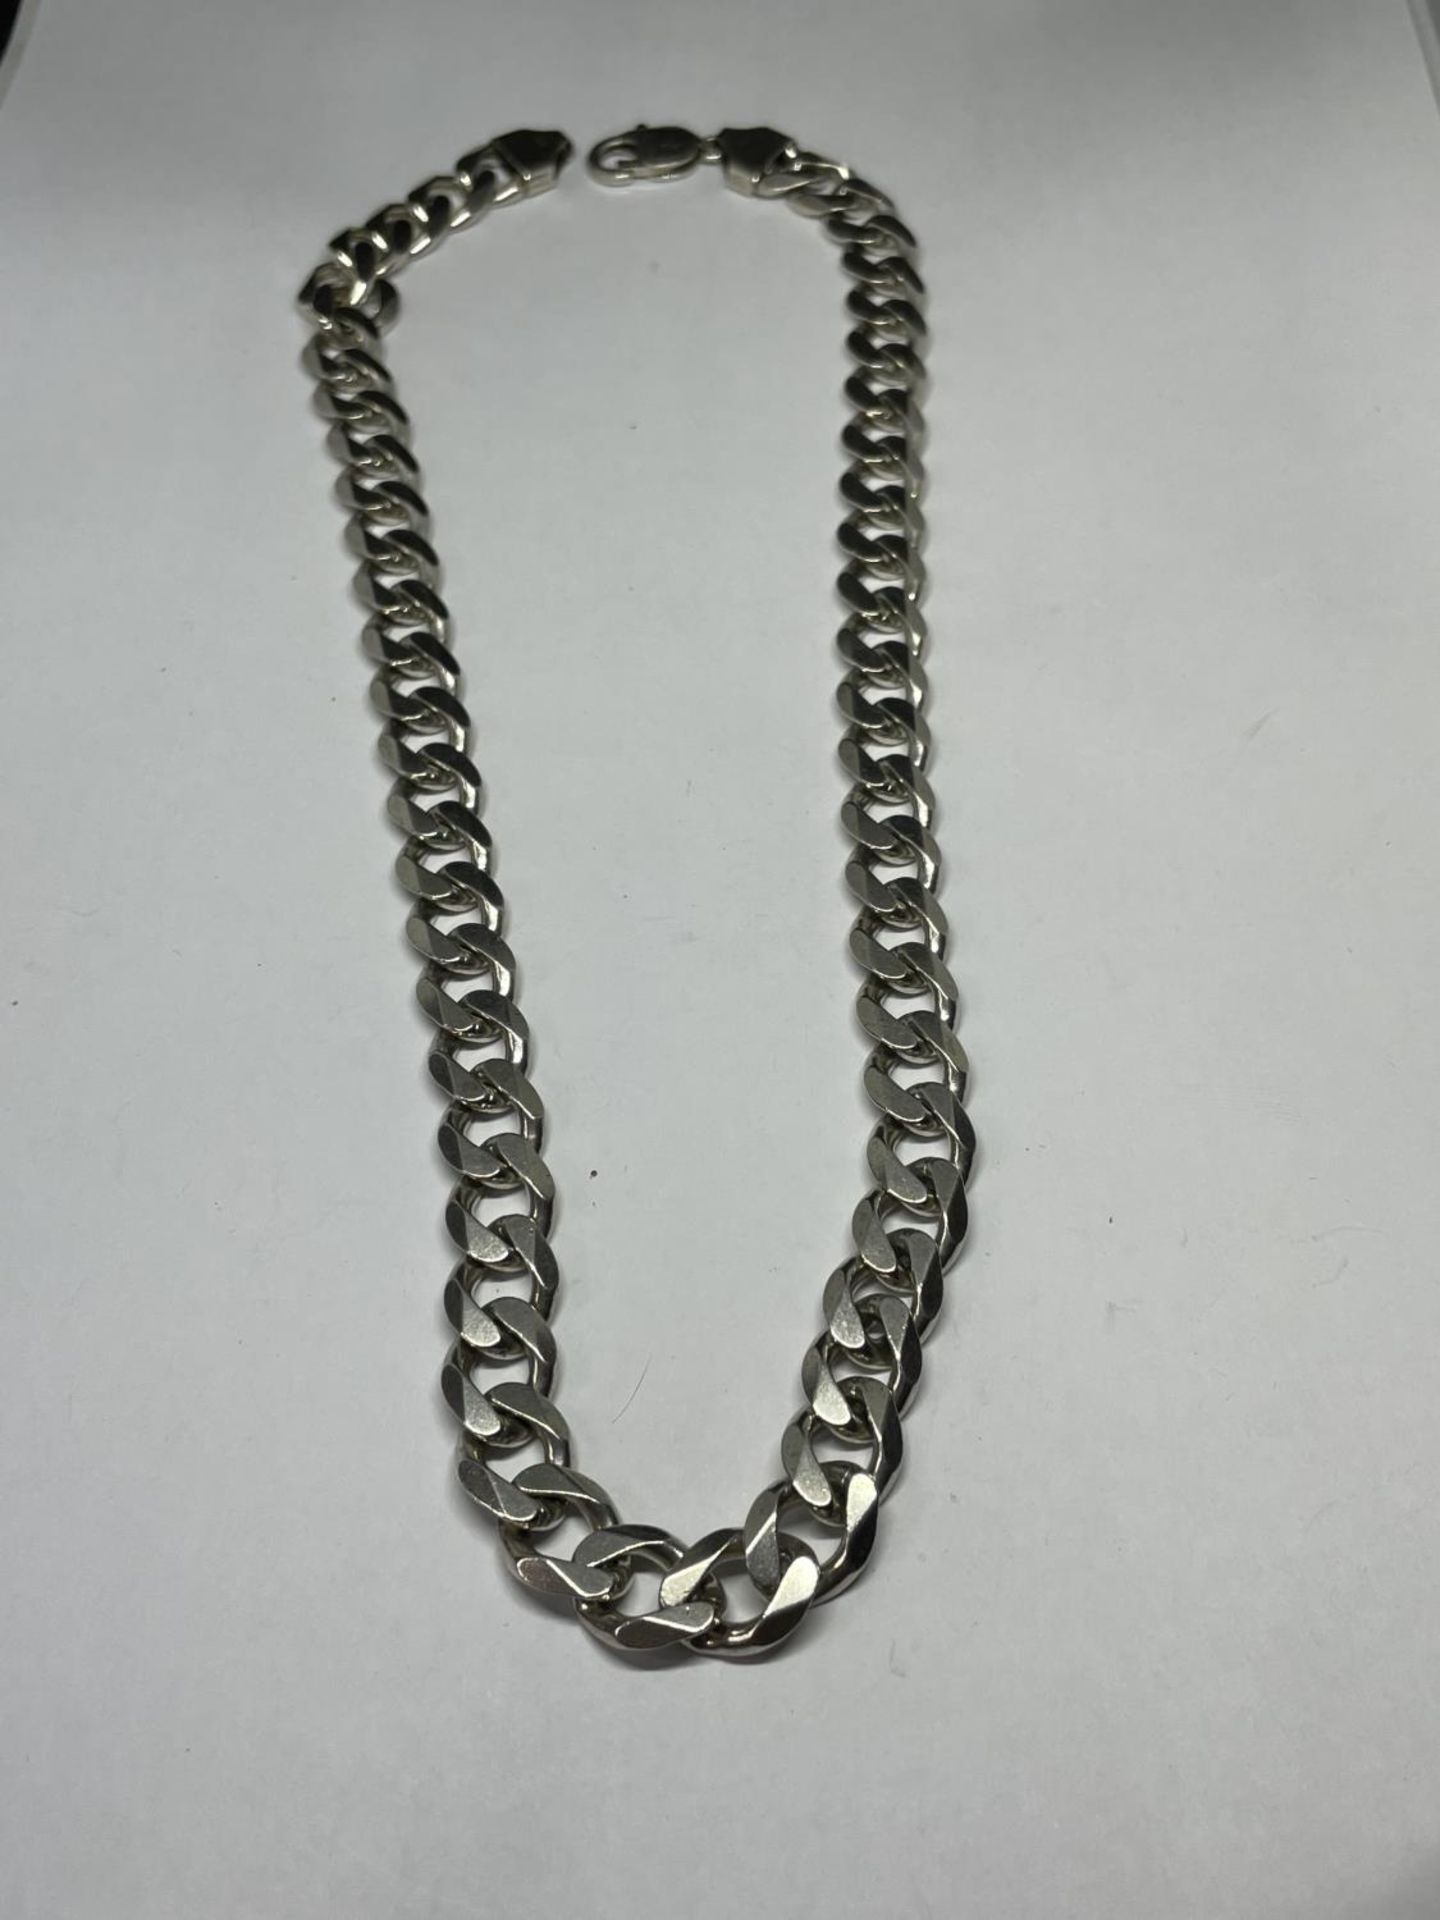 A MARKED SILVER HEAVY FLAT LINK NECKLACE LENGTH 20 INCHES